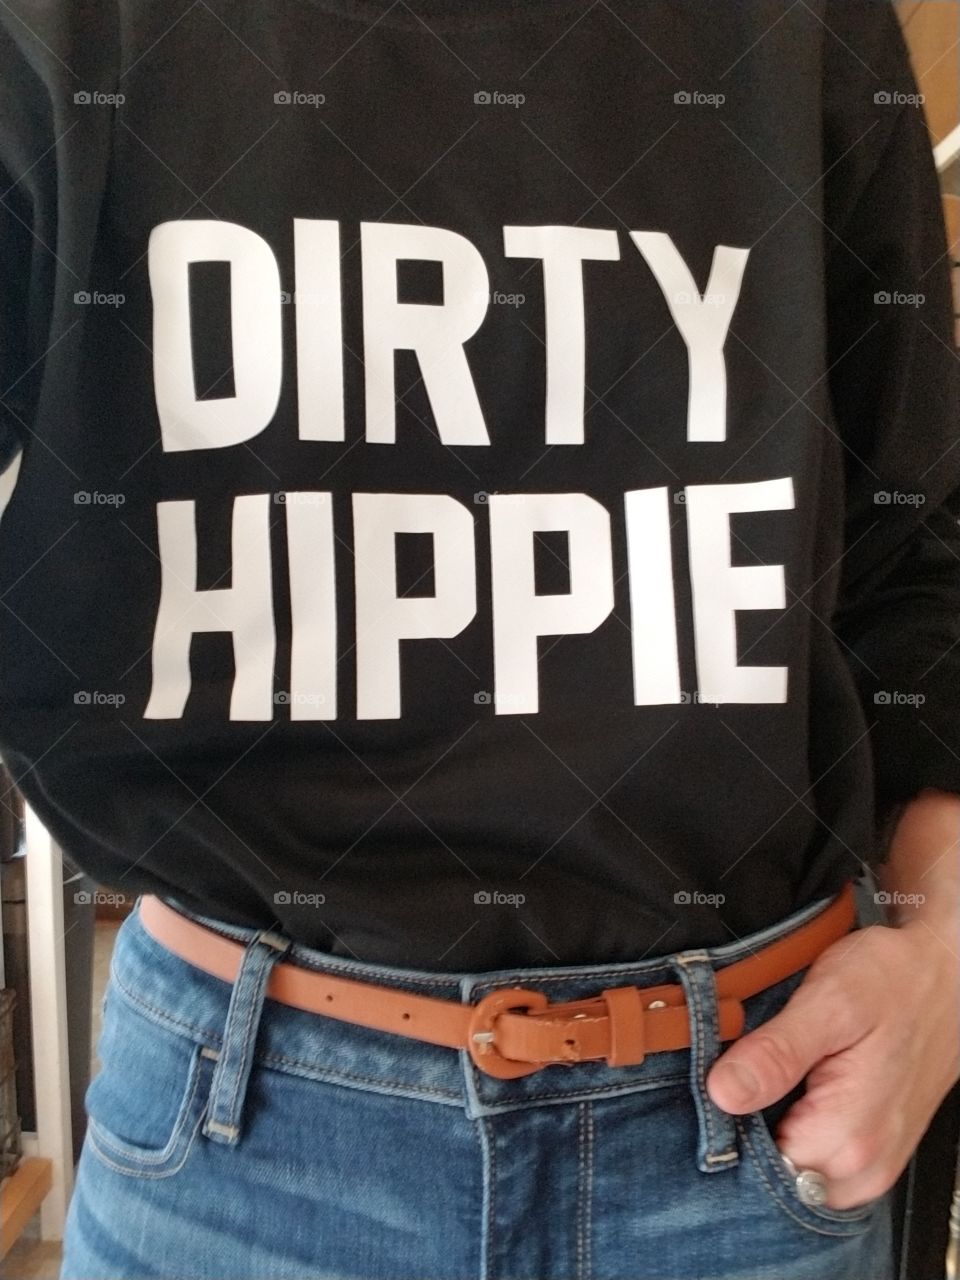 When the shirt fits.....#wearit #dirtyhippie #maybenotdirty #isthereacleanone ? #borninthewrongdecade #hippiewear #hippie #oldsoul #vintage